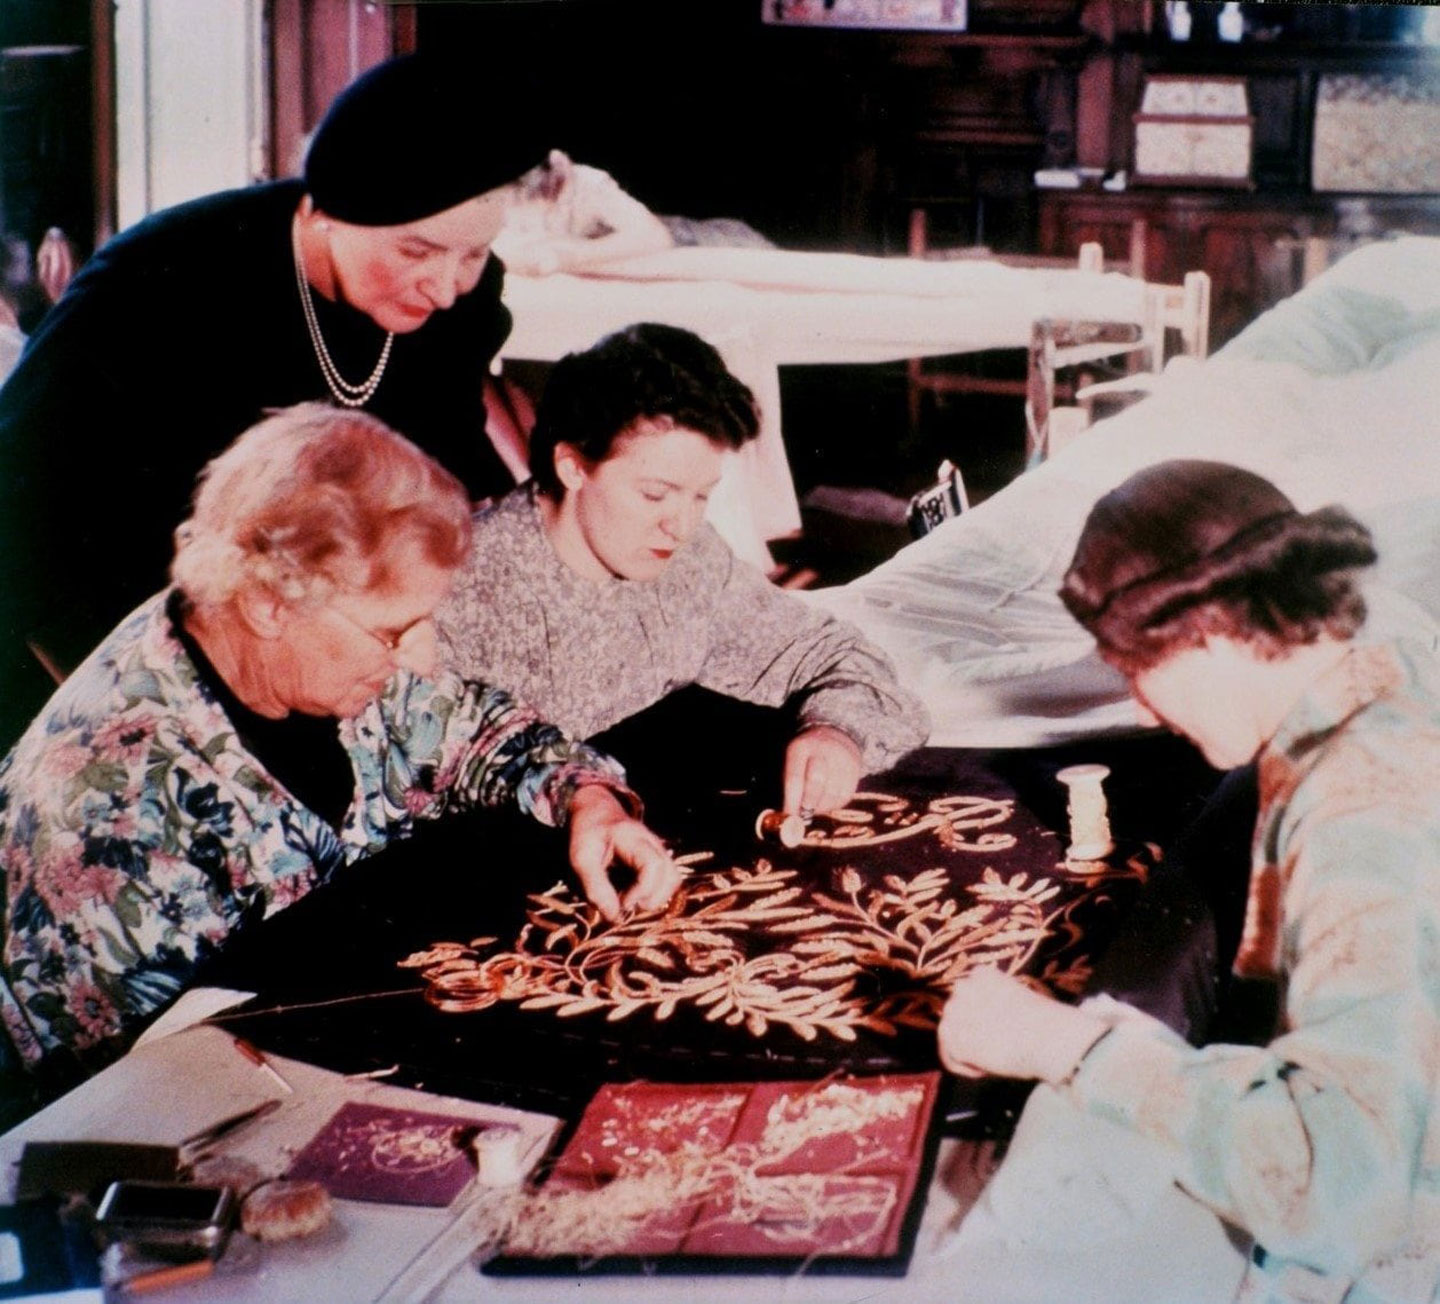 Members of the Royal School of Needlework work with gold embroidery on the Purple Robe of Estate, part of the set of robes for the forthcoming Coronation of Queen Elizabeth II, in London circa 1953